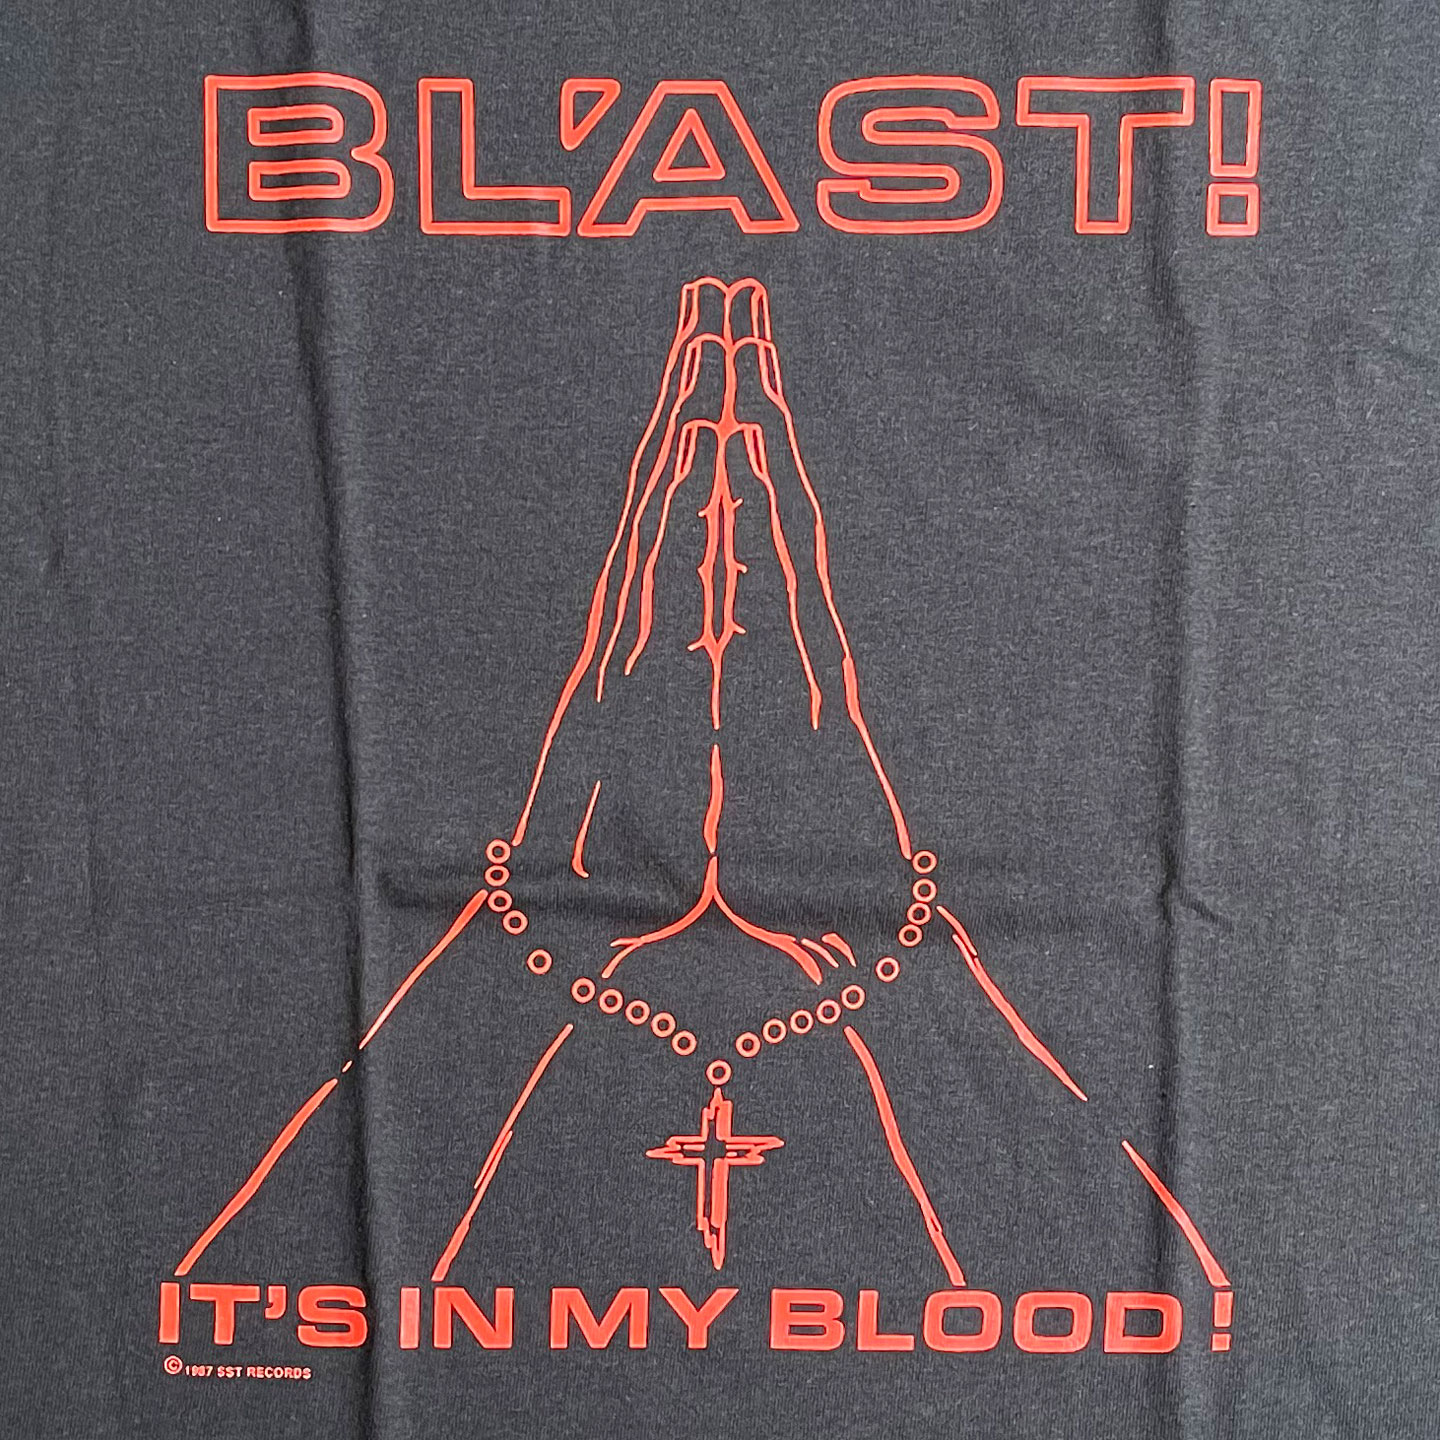 BL'AST! Tシャツ ITS IN MY BLOOD